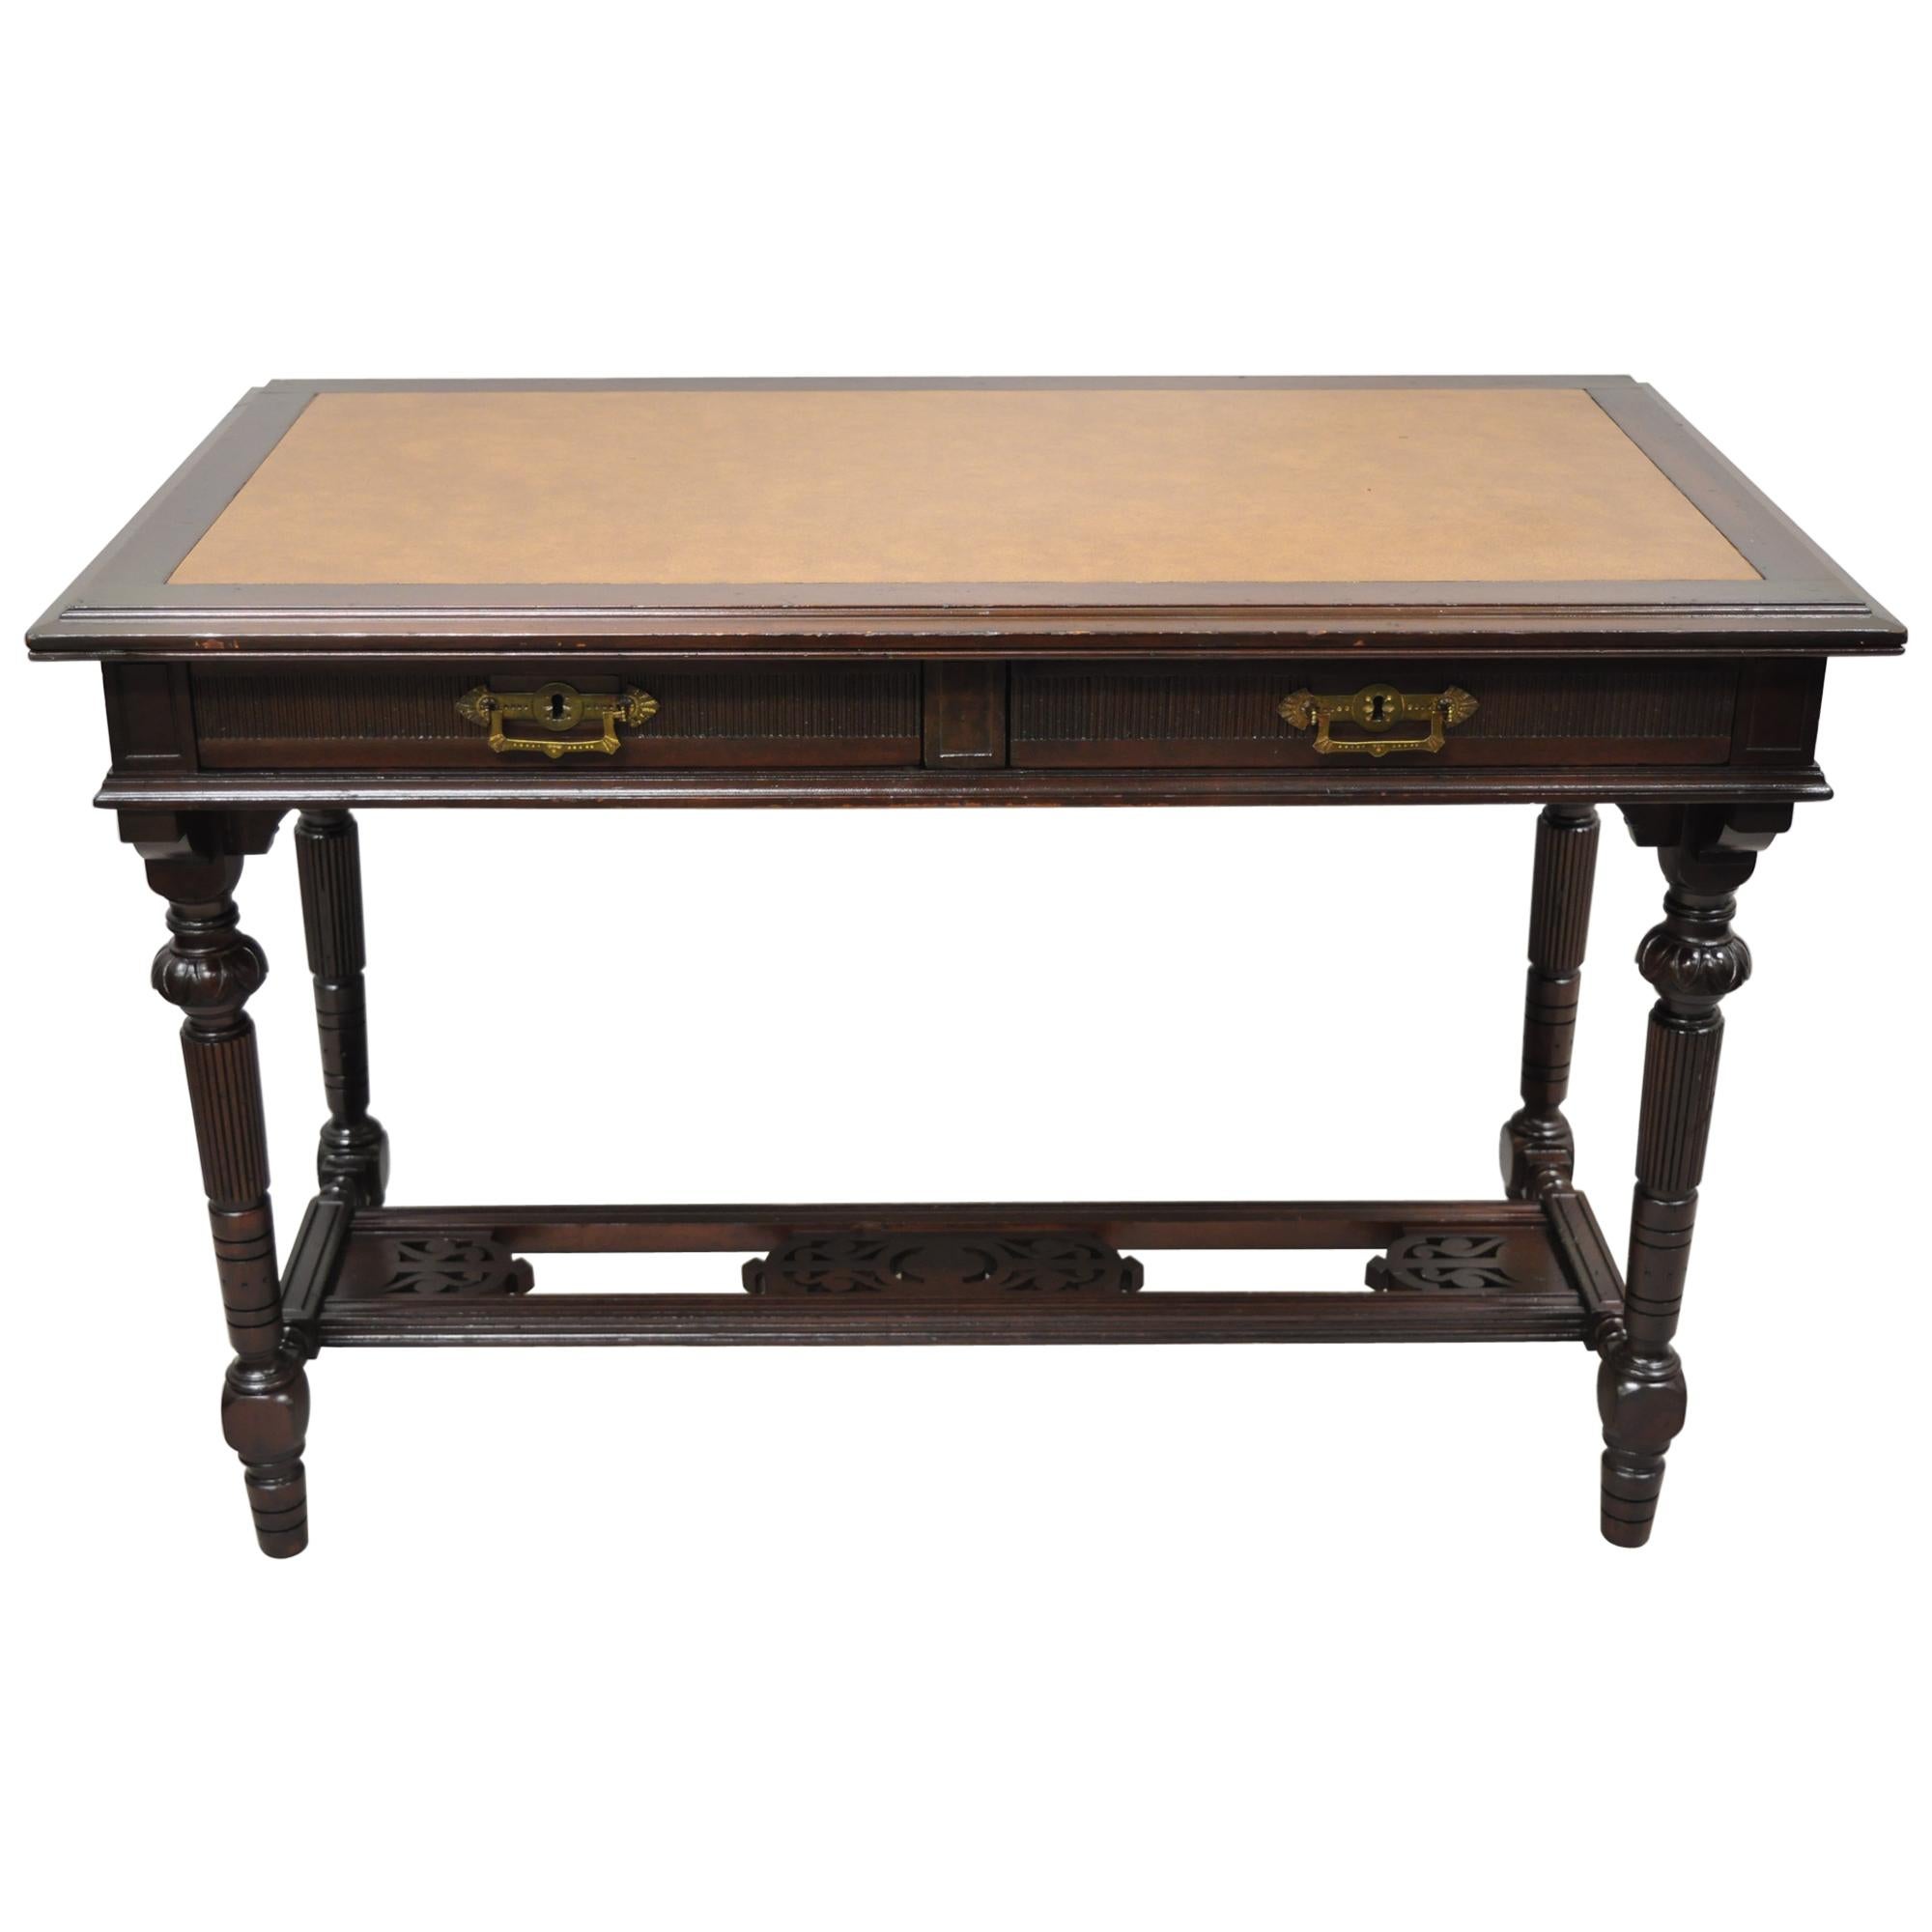 Antique Eastlake Victorian Two Drawer Carved Walnut Library Table Desk